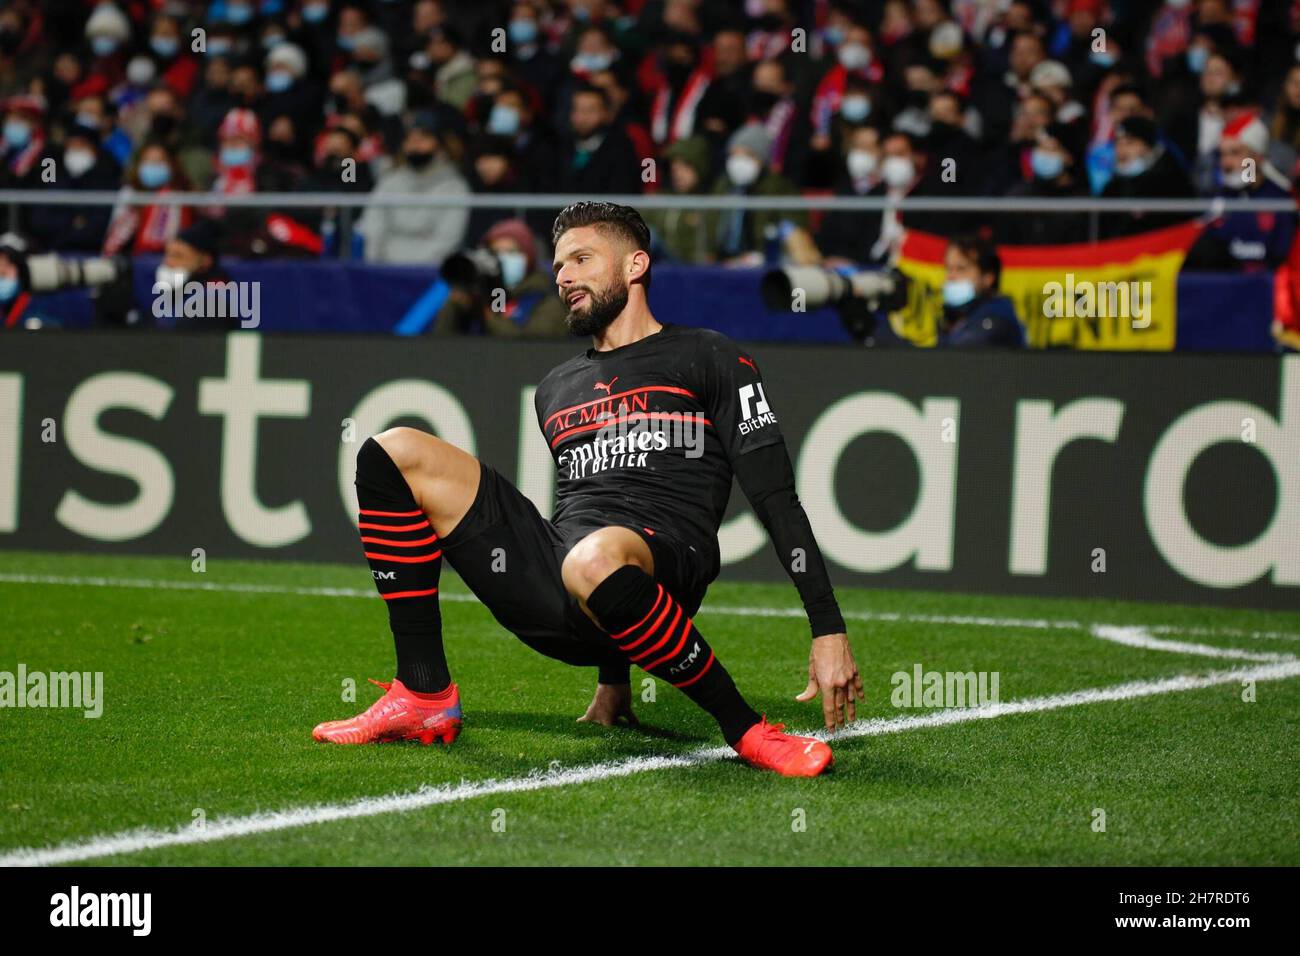 Madrid, Spain. 24th Nov, 2021. Leo defender from AC Milan, during the UEFA Champions League group stage against Atletico de Madrid at the Wanda Metropolitano stadium. (Photo by: Ivan Abanades Medina Credit: CORDON PRESS/Alamy Live News Stock Photo